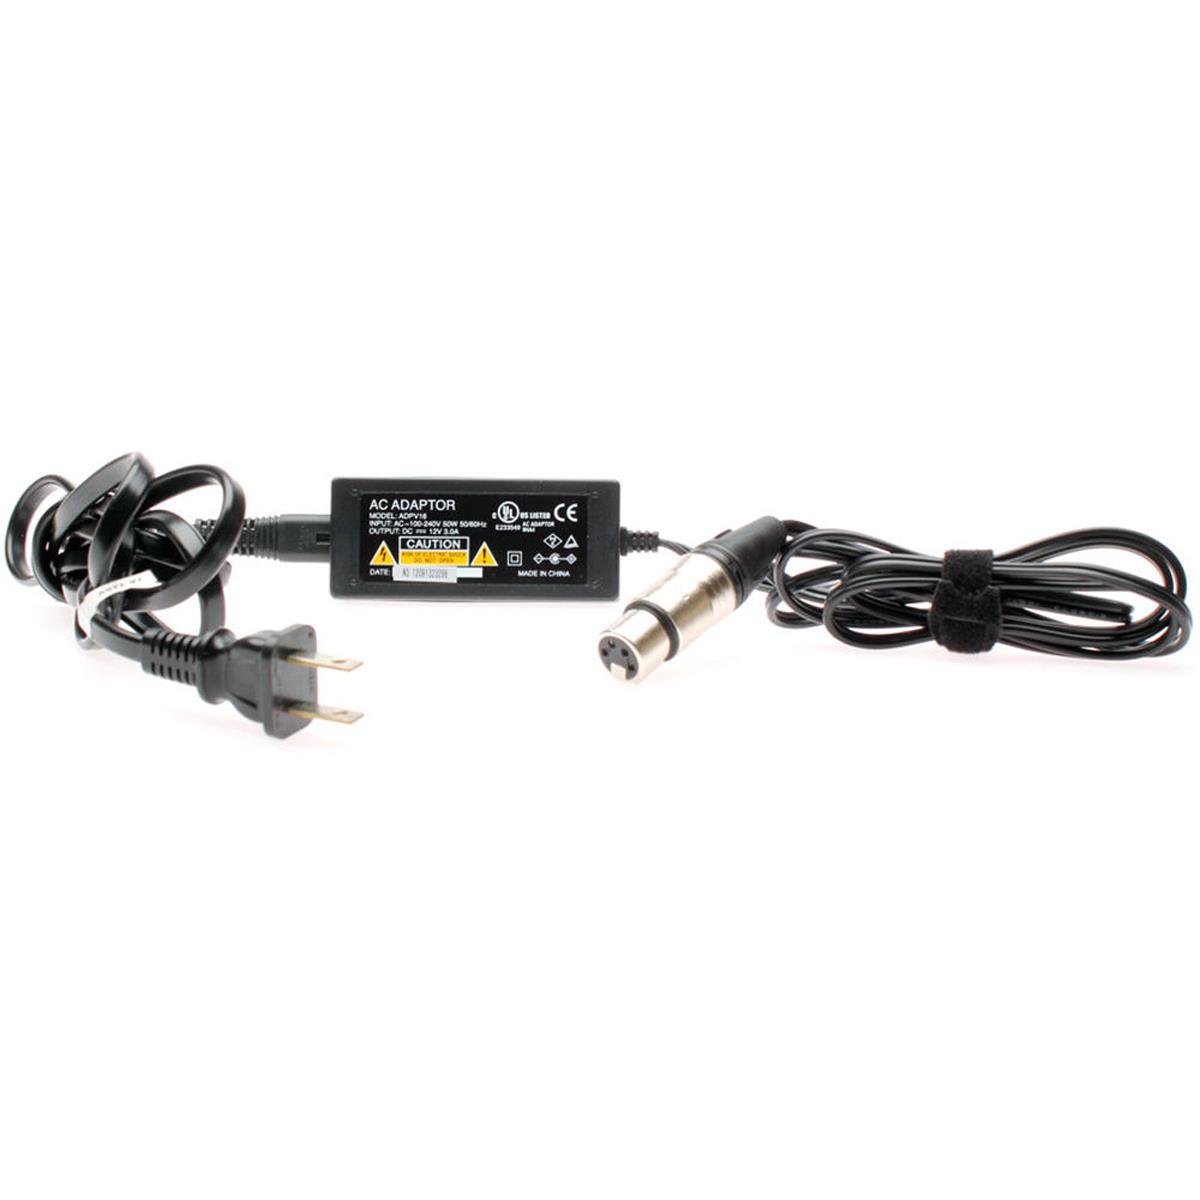 Image of JVC ADPV16 AC Power Adapter for DT-F9L5U Monitor